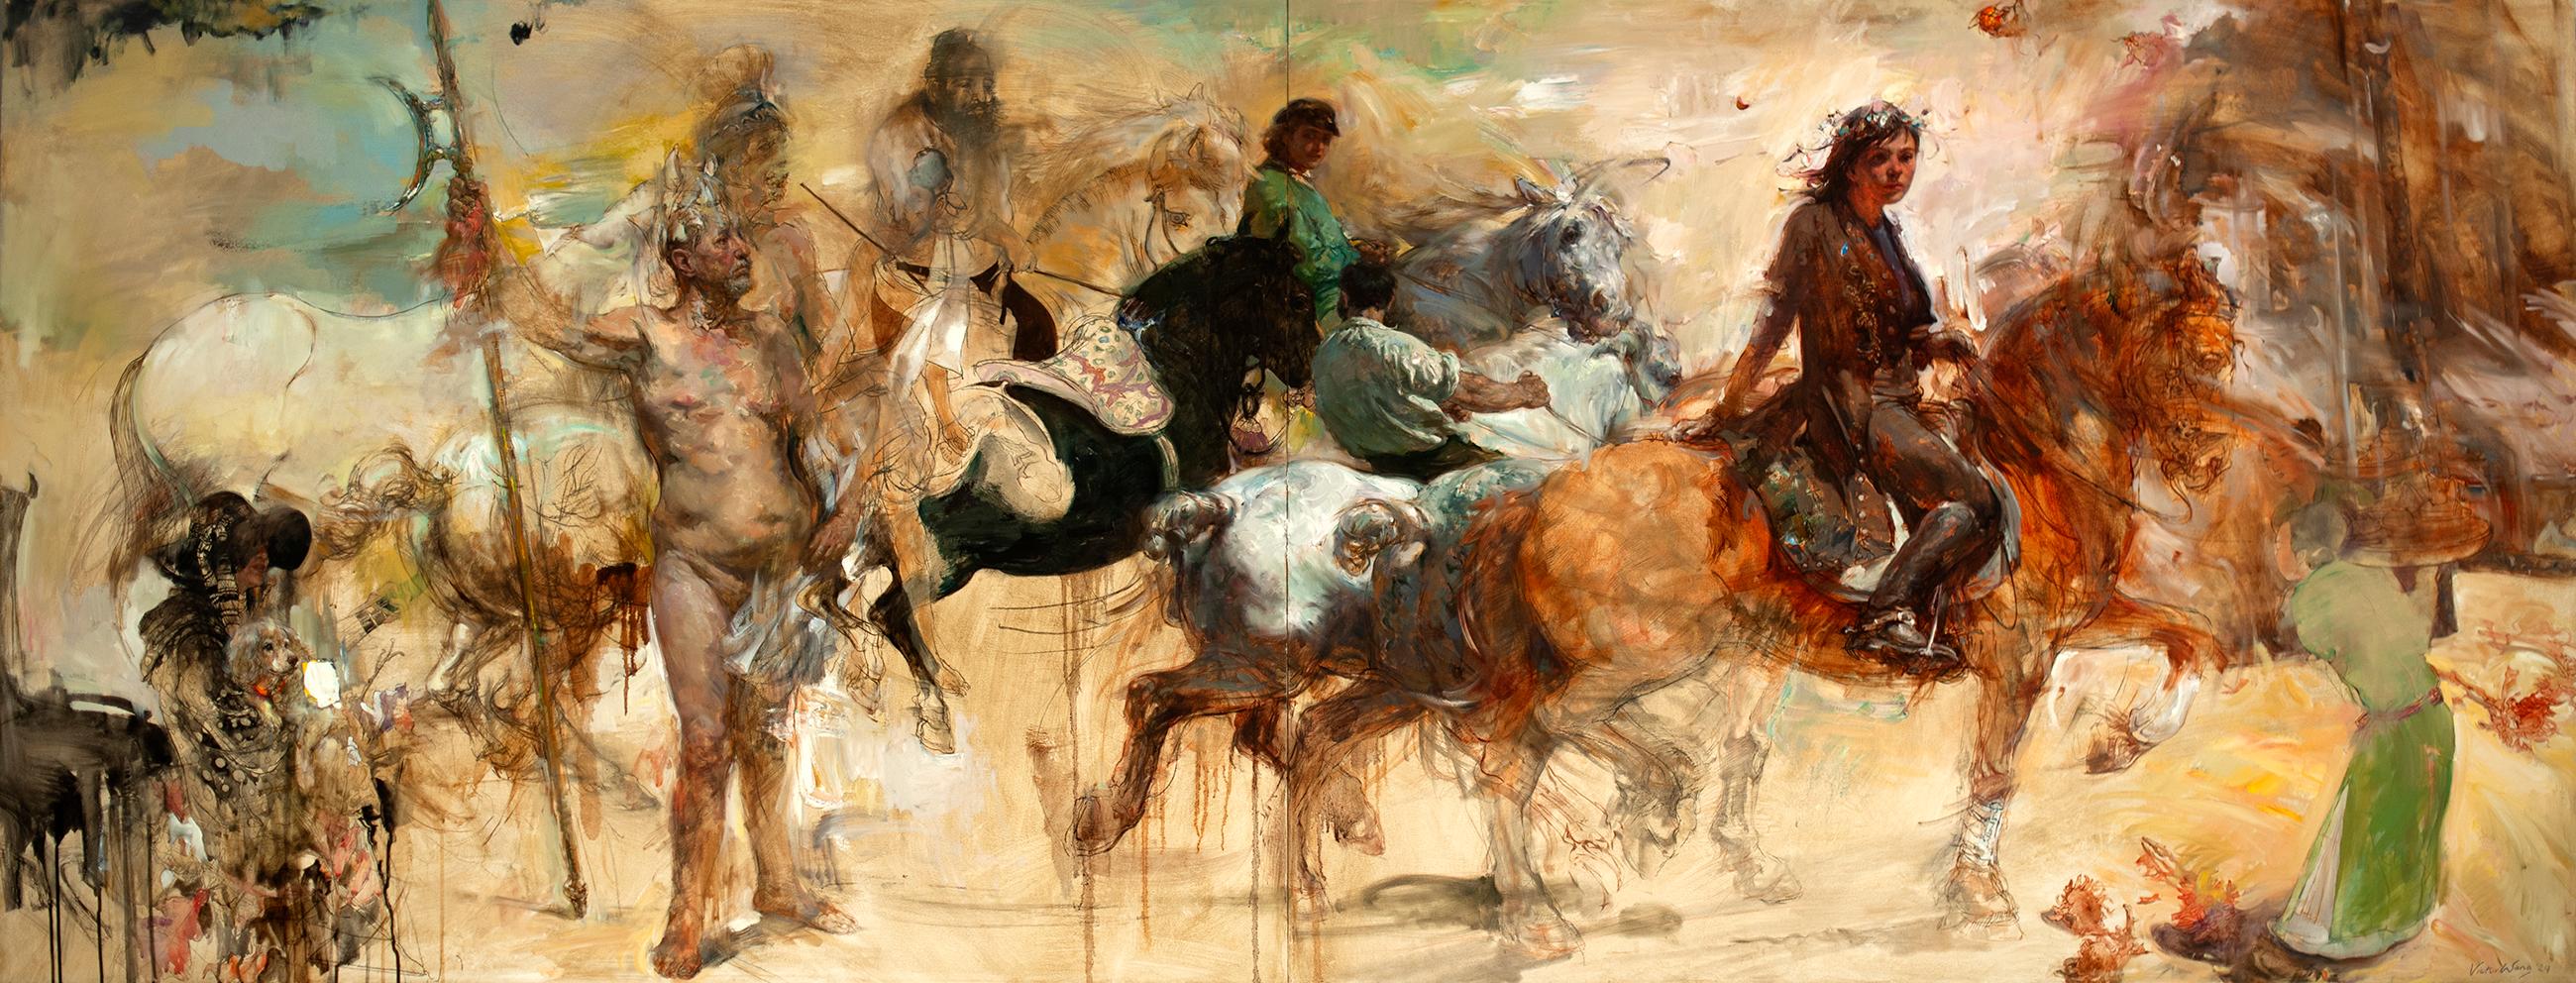 Victor Wang Figurative Painting - "Autumn Riding", Mixed Media Oil Painting on Canvas, Collage, Figurative